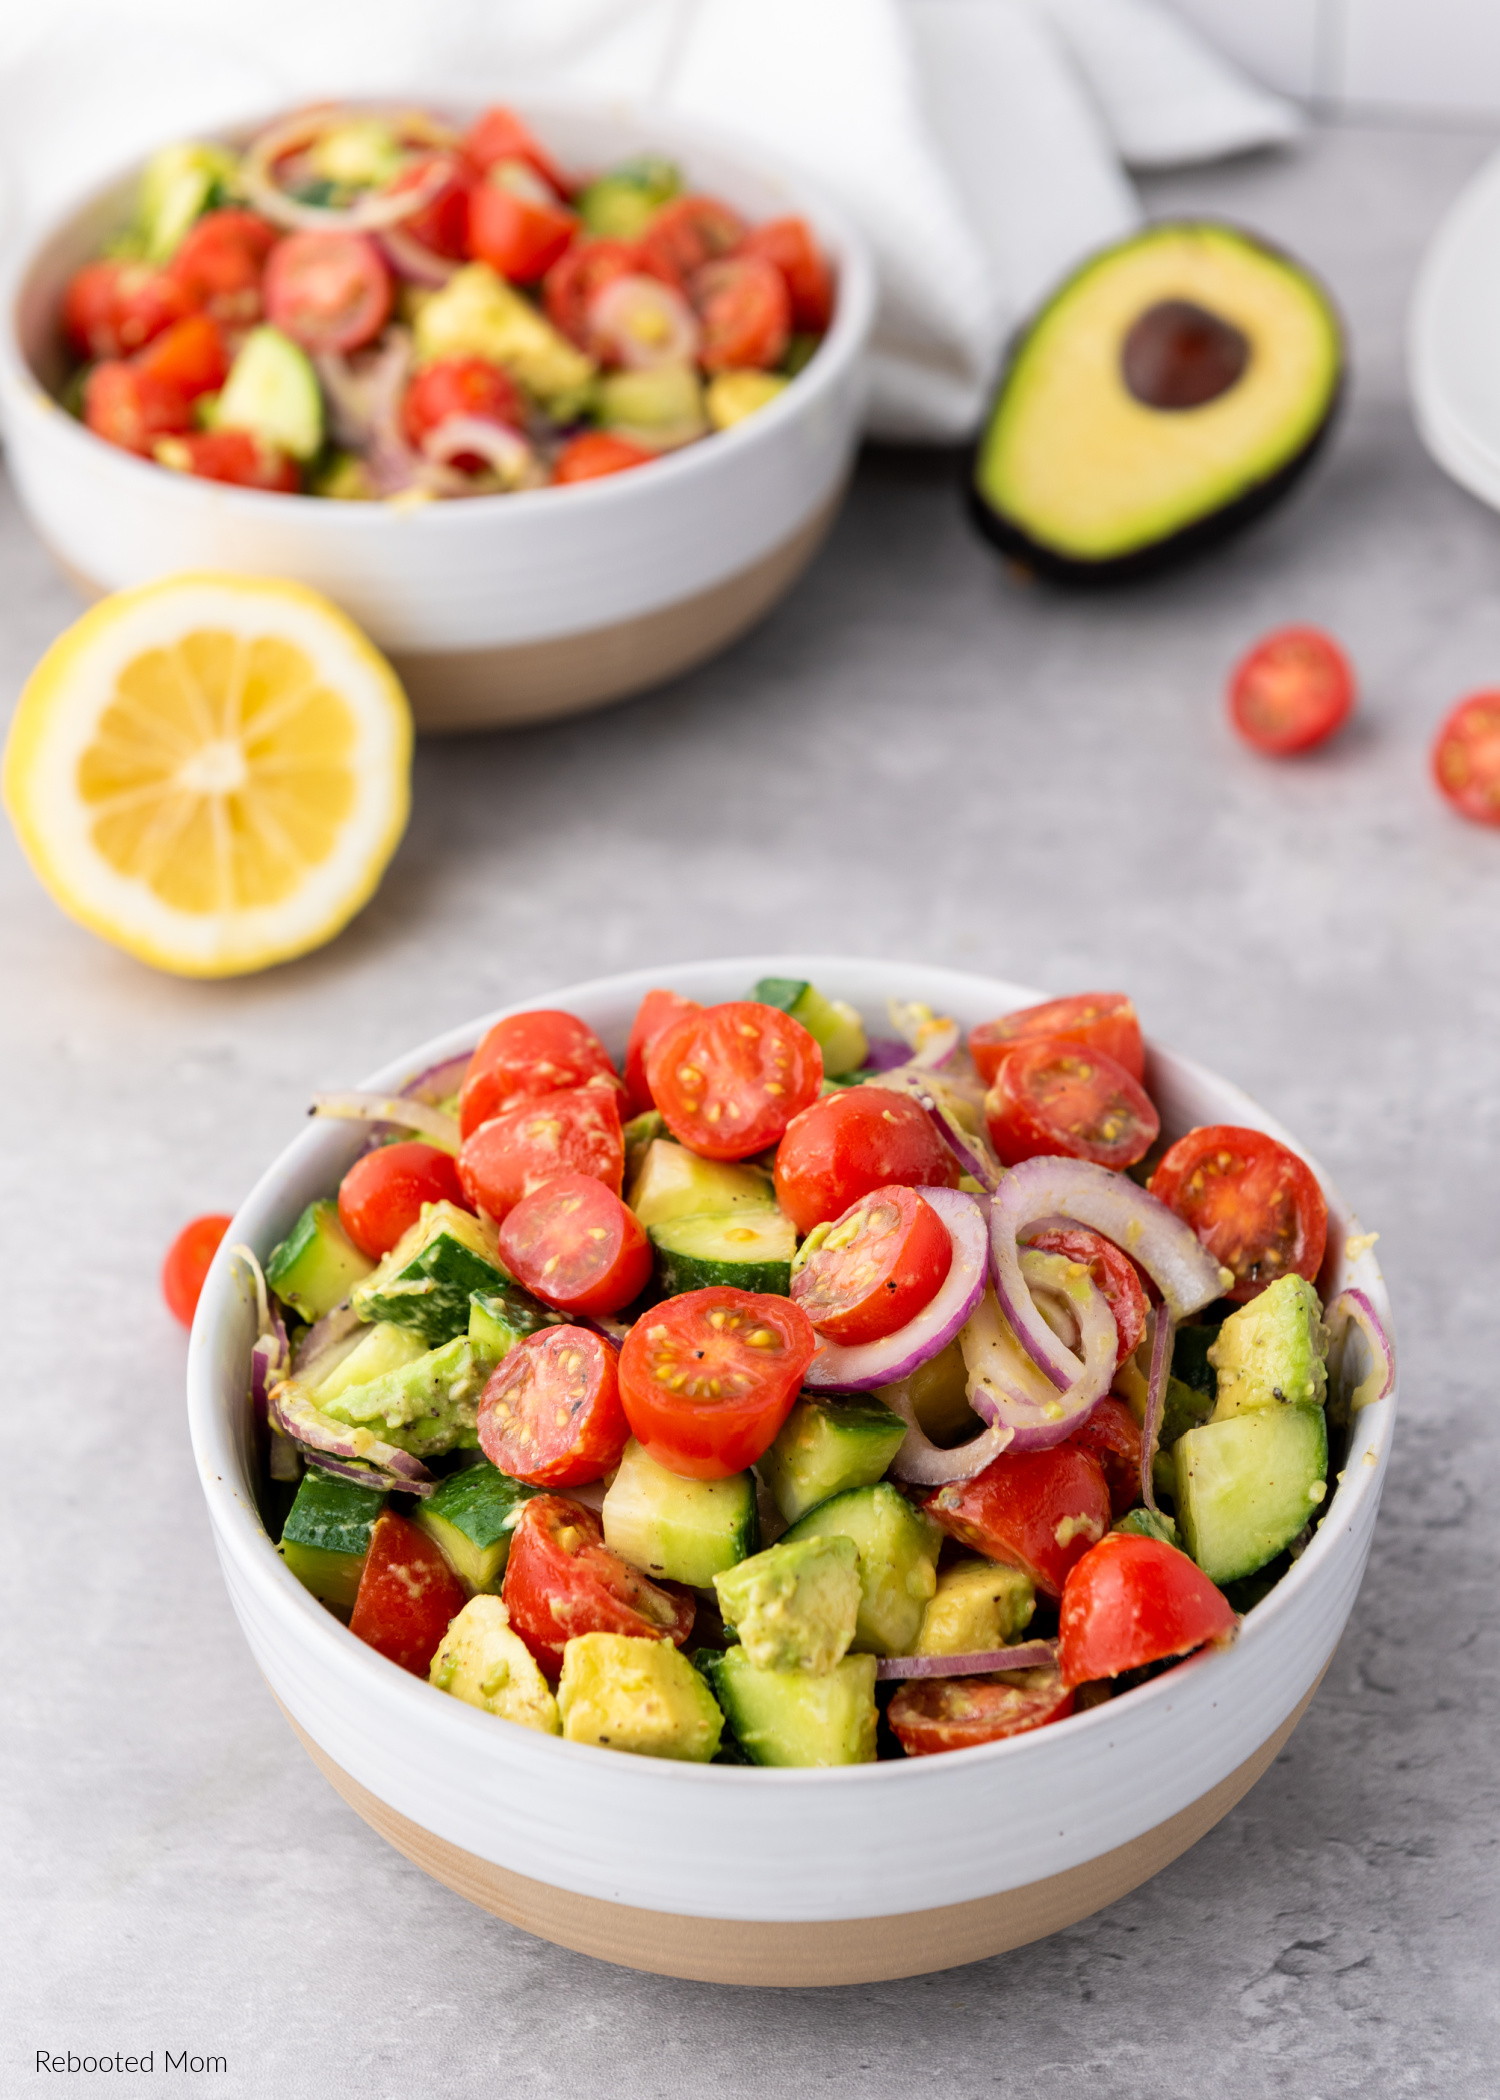 Avocado Salad - an equally beautiful and delicious treat to welcome the hot summer weather, perfect to serve as a side or as a light dinner meal that's healthy and easy!